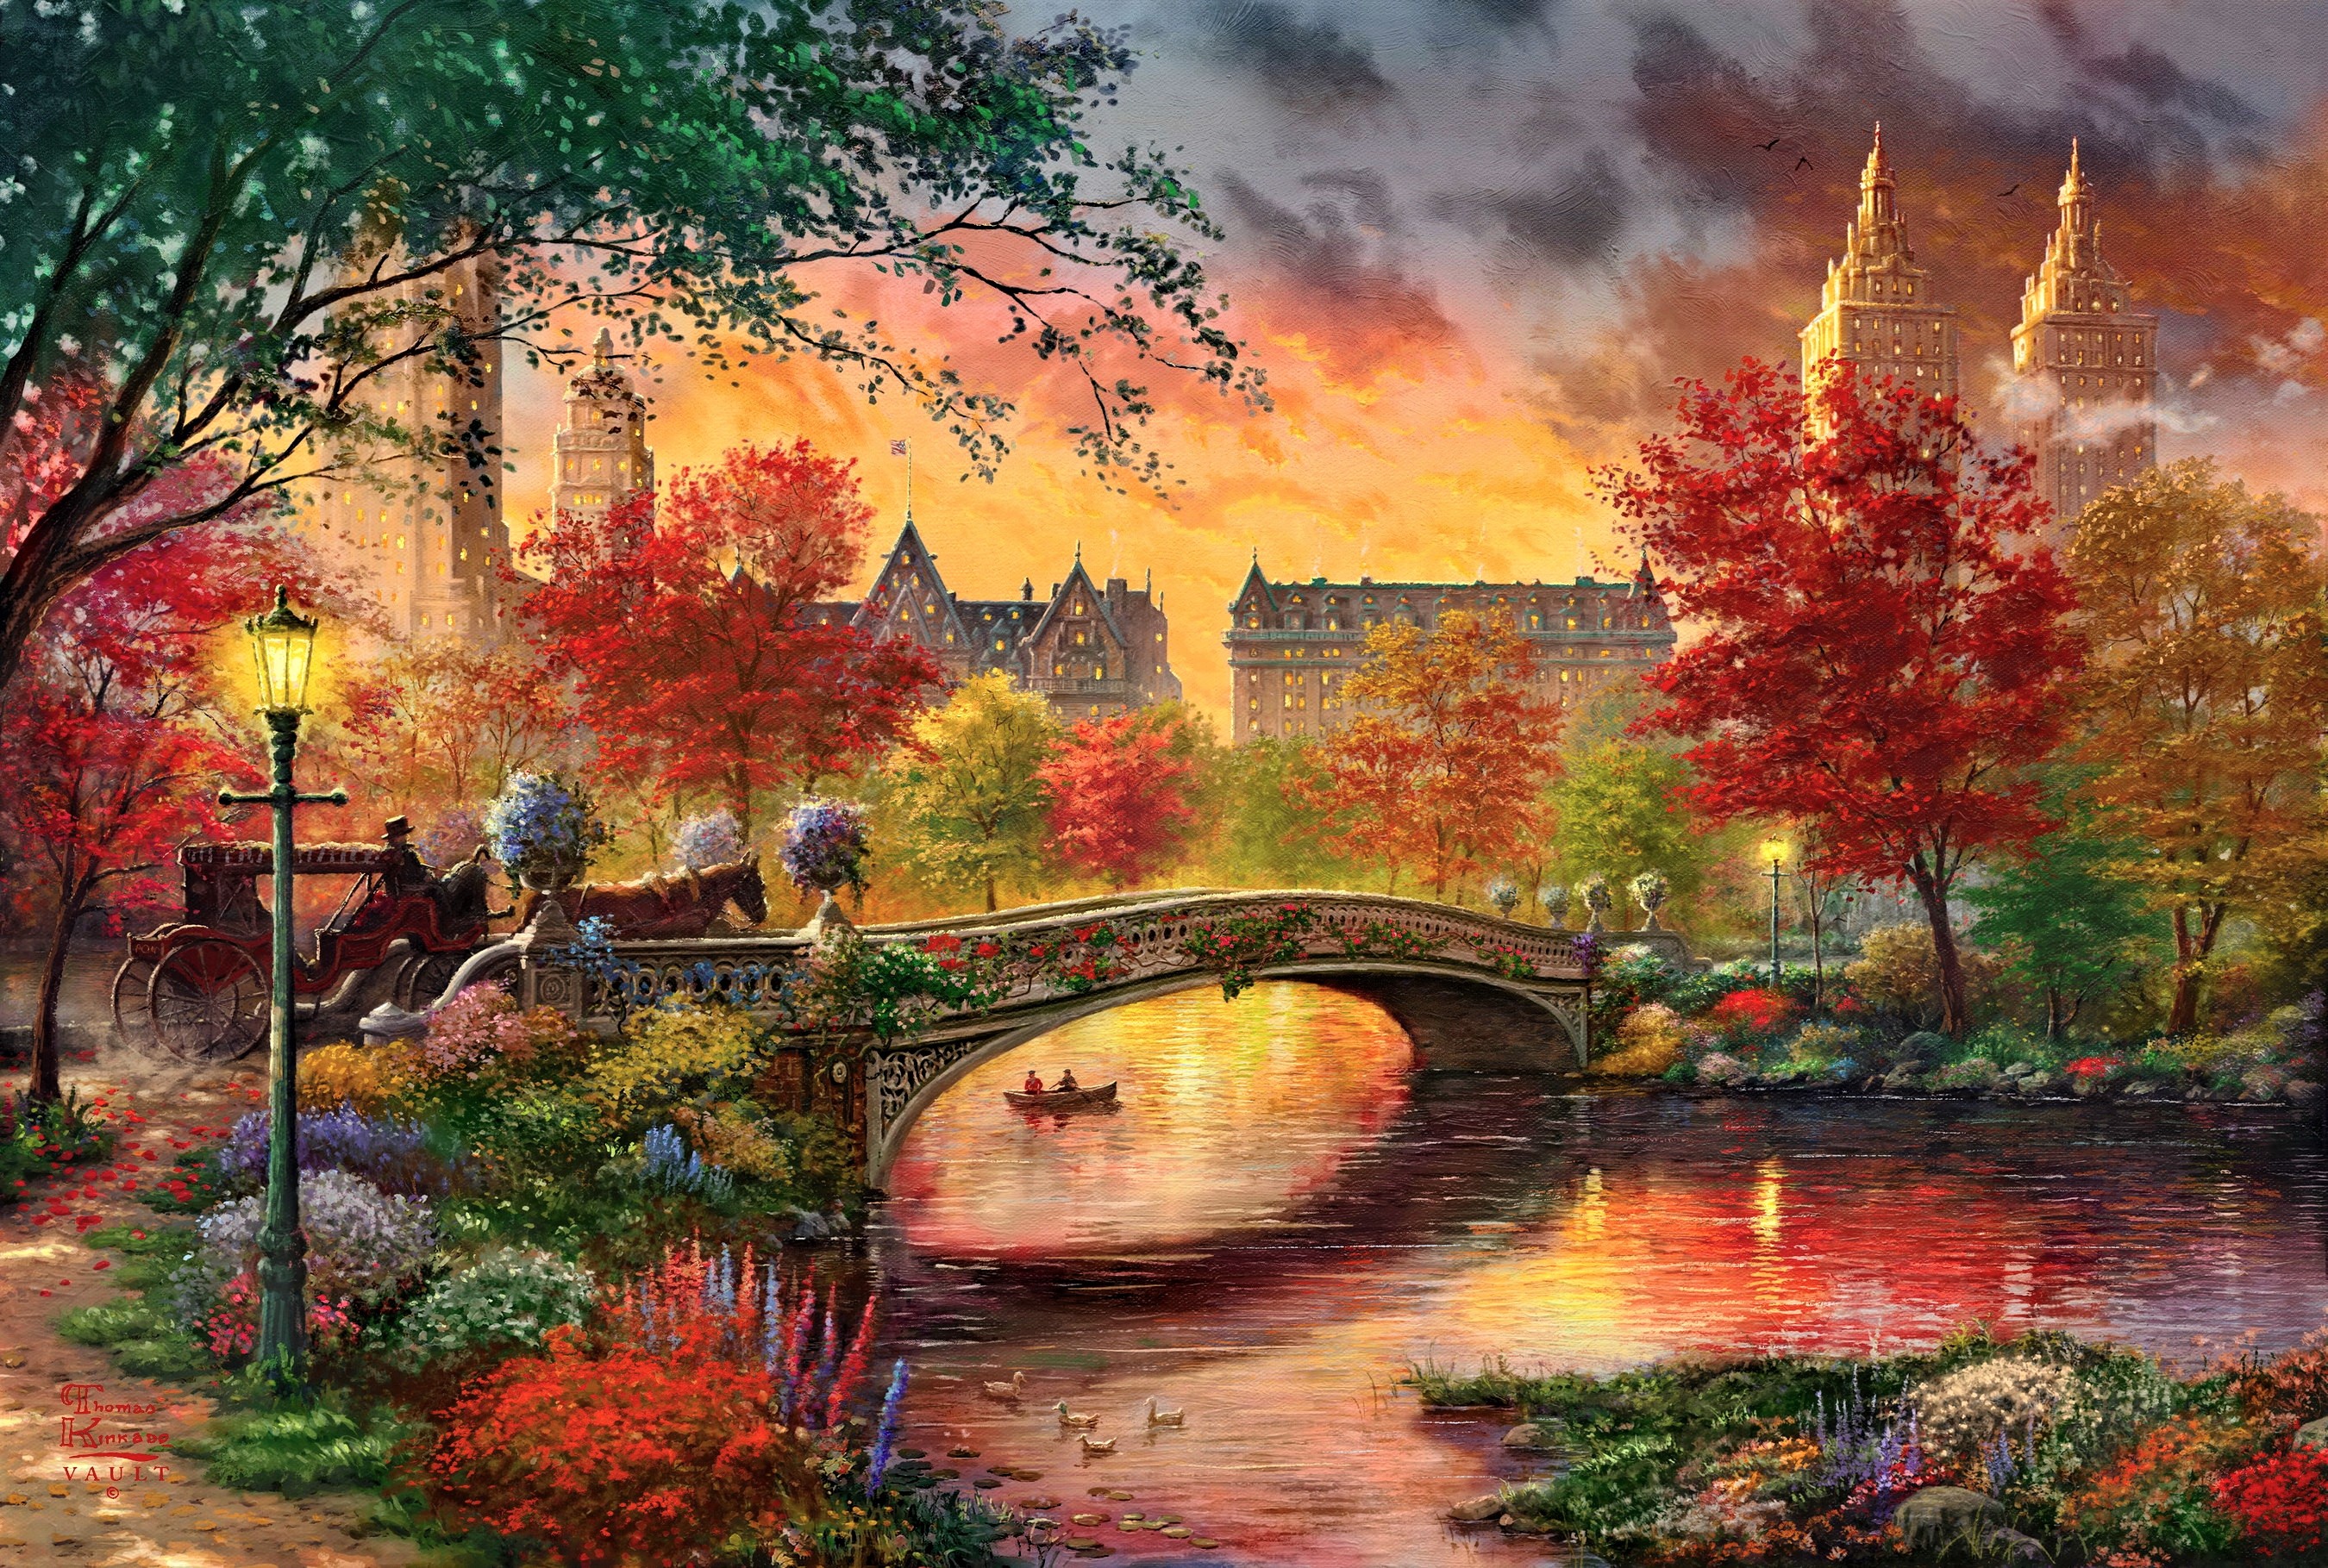 Download wallpaper artistic Painting with tags: Artistic, Bridge, River, Fall, Vintage, Painting, Colorful, Retro, iMac, New York, Central Park, Horse Drawn Vehicle